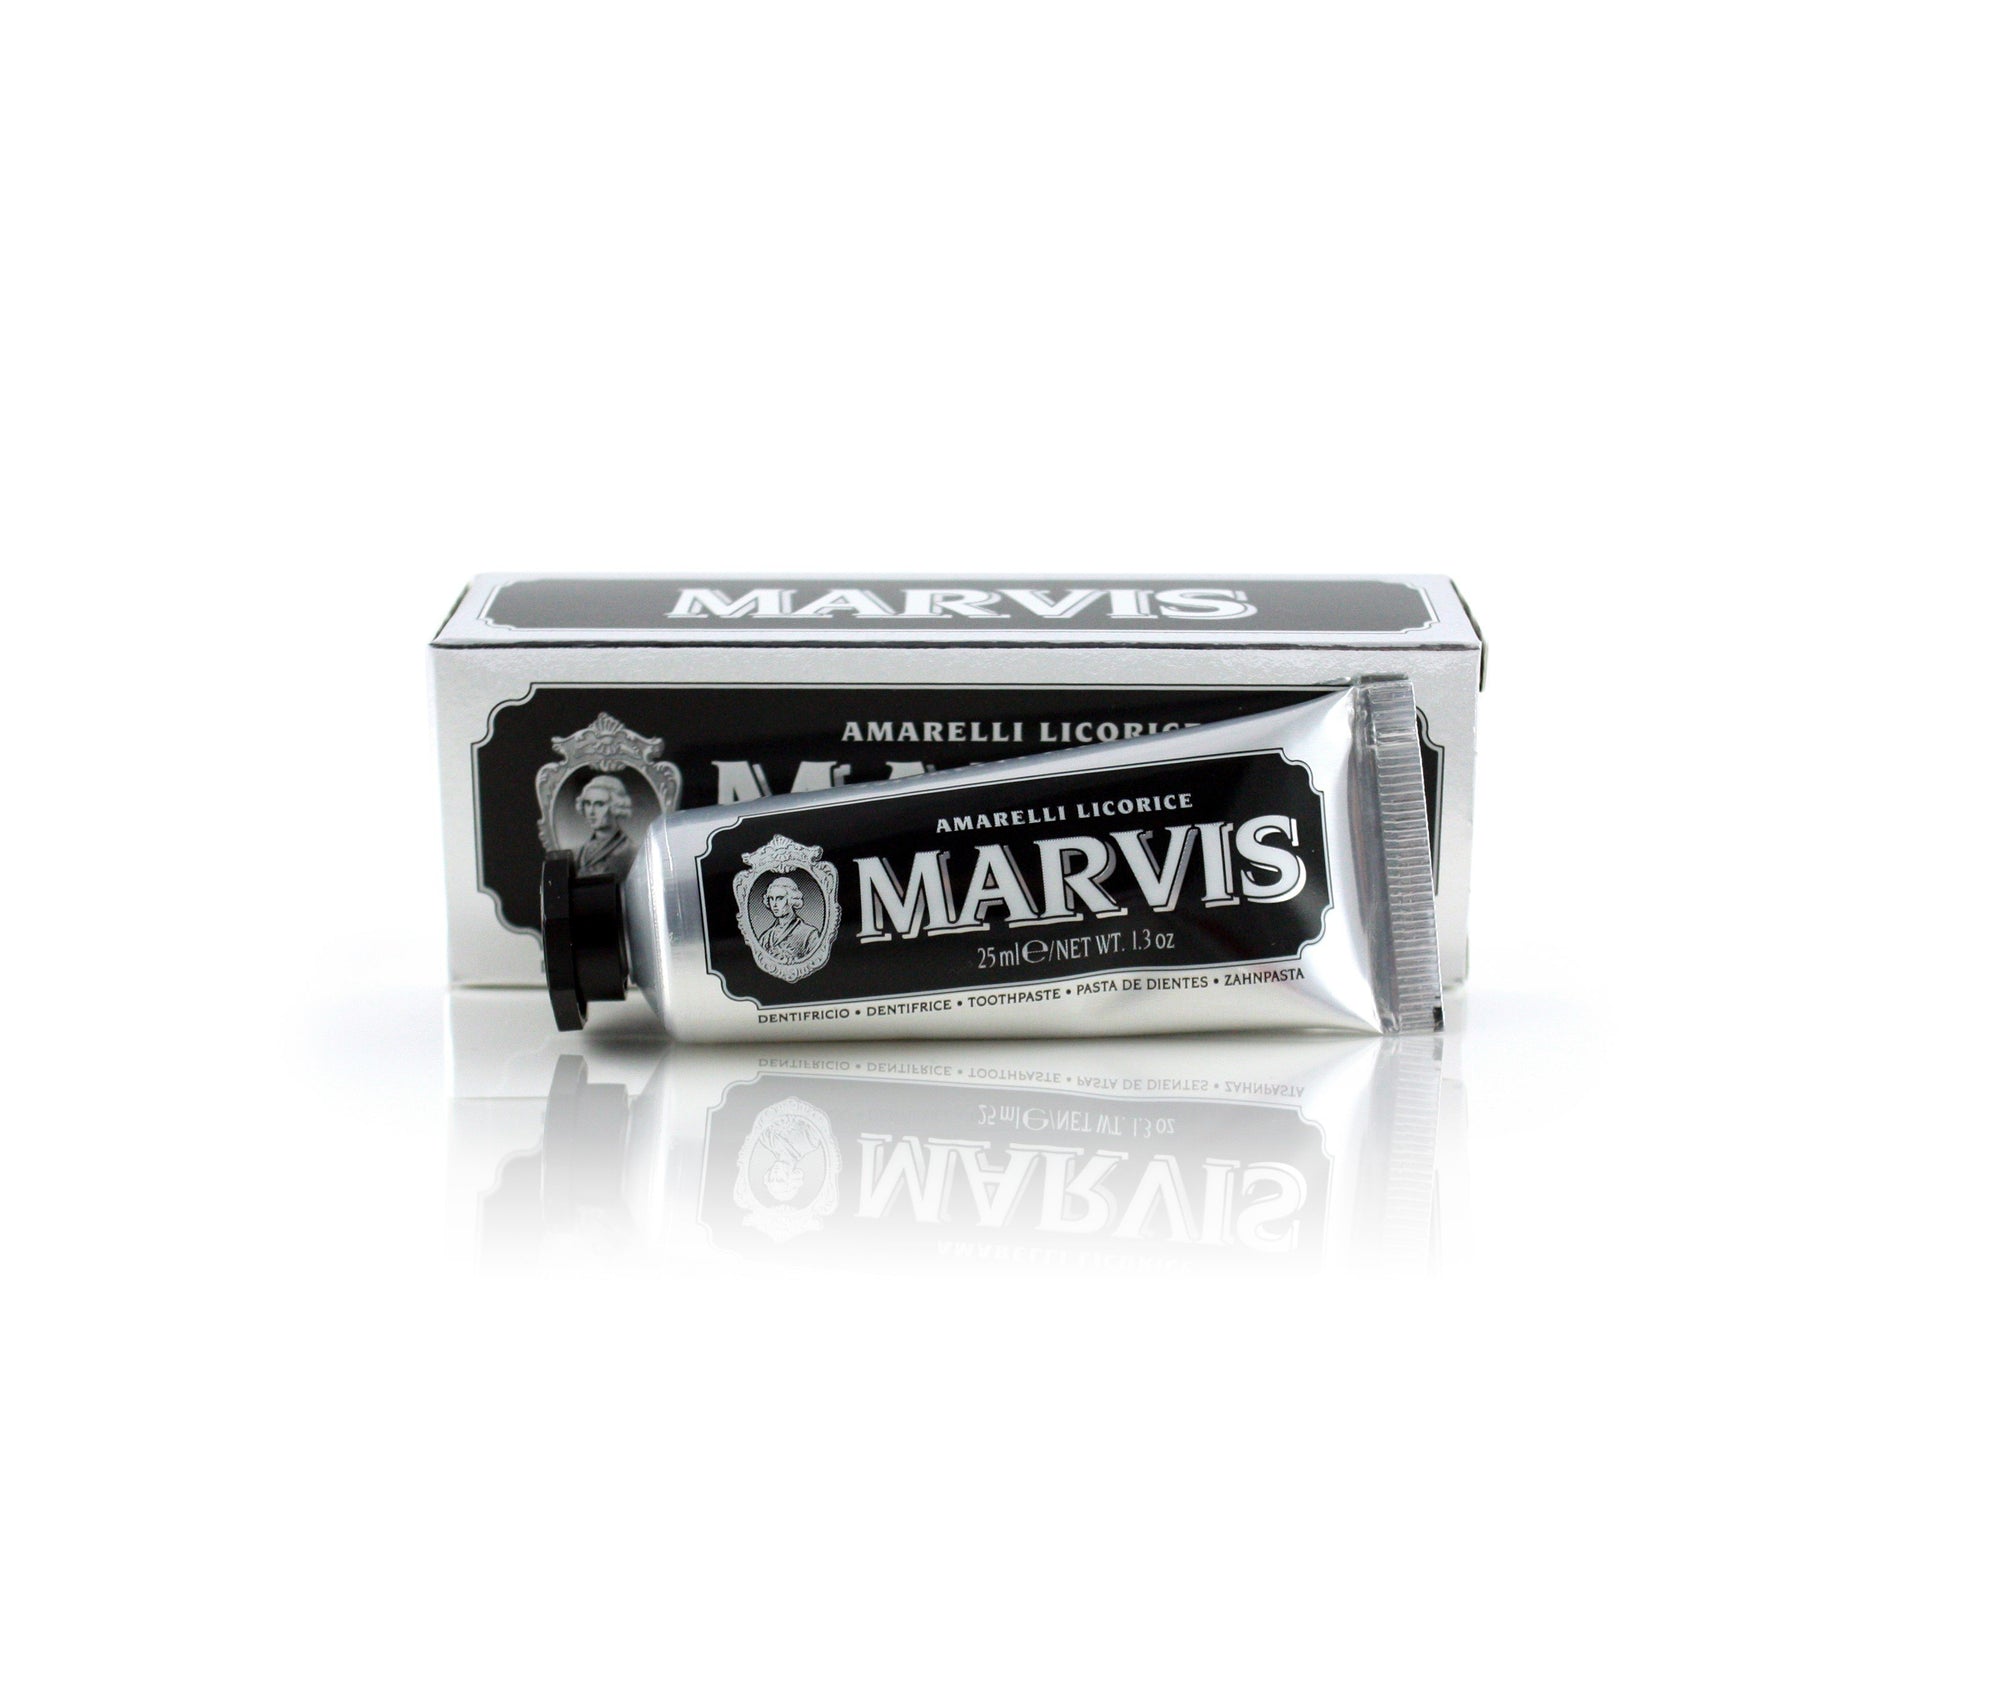 Marvis - Amarelli Licorice Toothpaste - Travel Size - Soap & Water Everyday